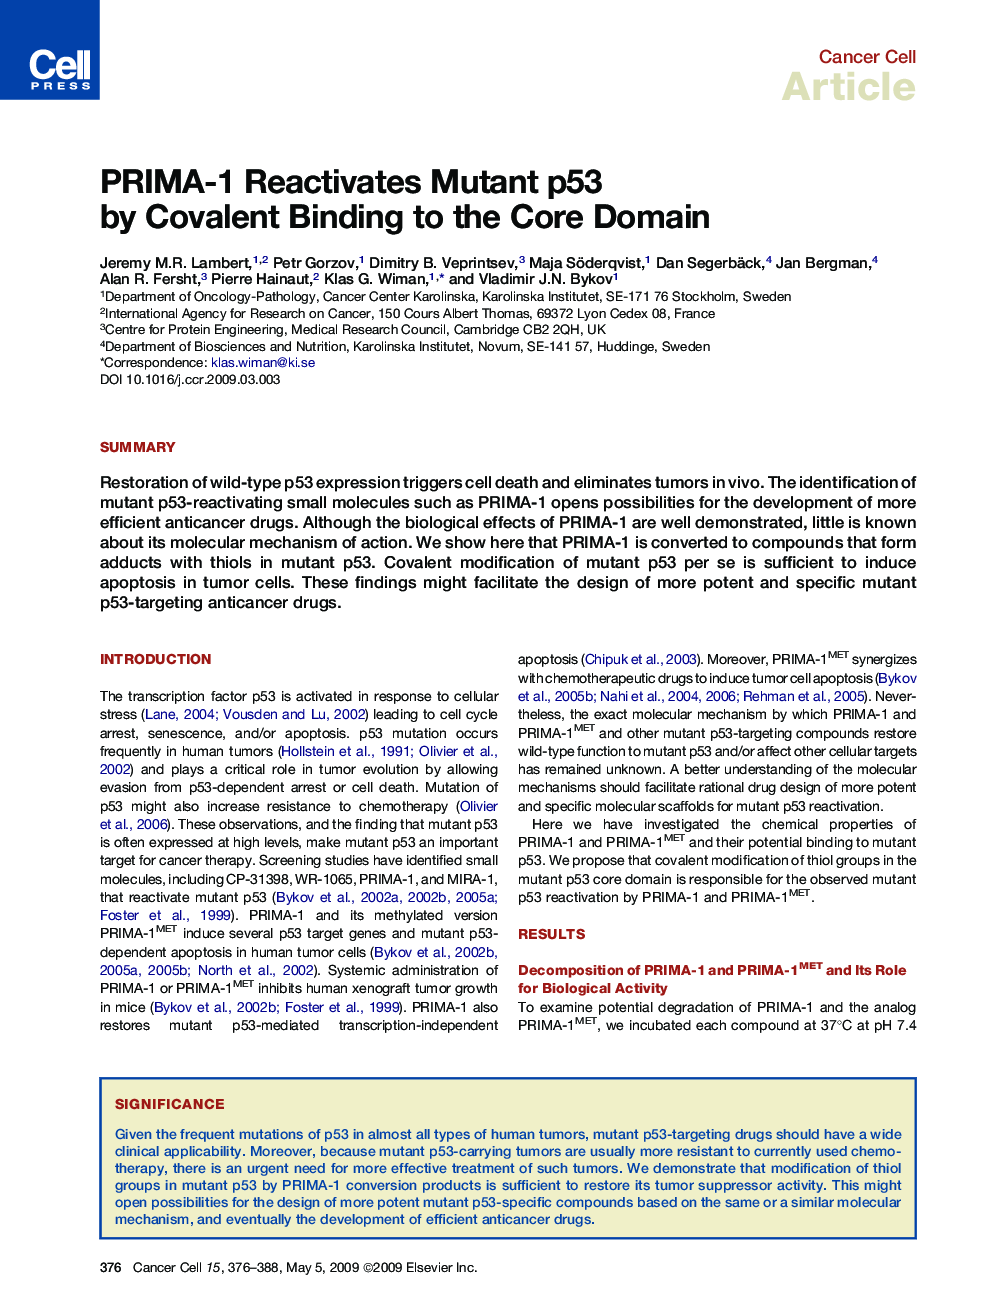 PRIMA-1 Reactivates Mutant p53 by Covalent Binding to the Core Domain